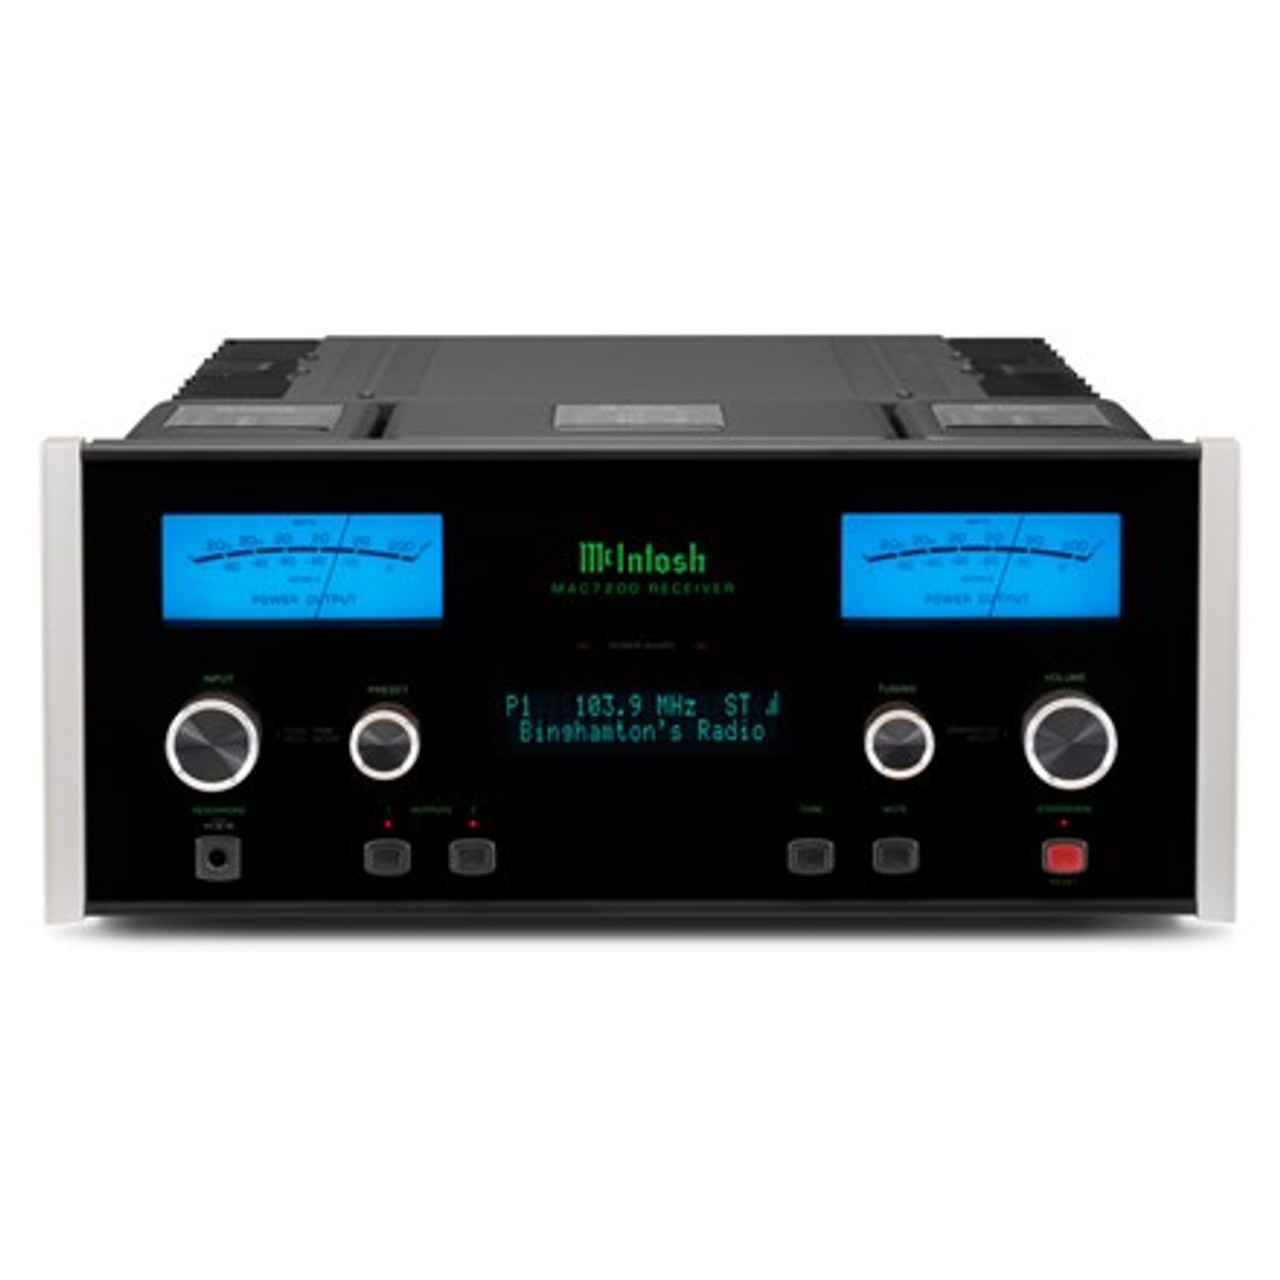 McIntosh Audio Delivers High-Performance Sound for Your Whole California  Home